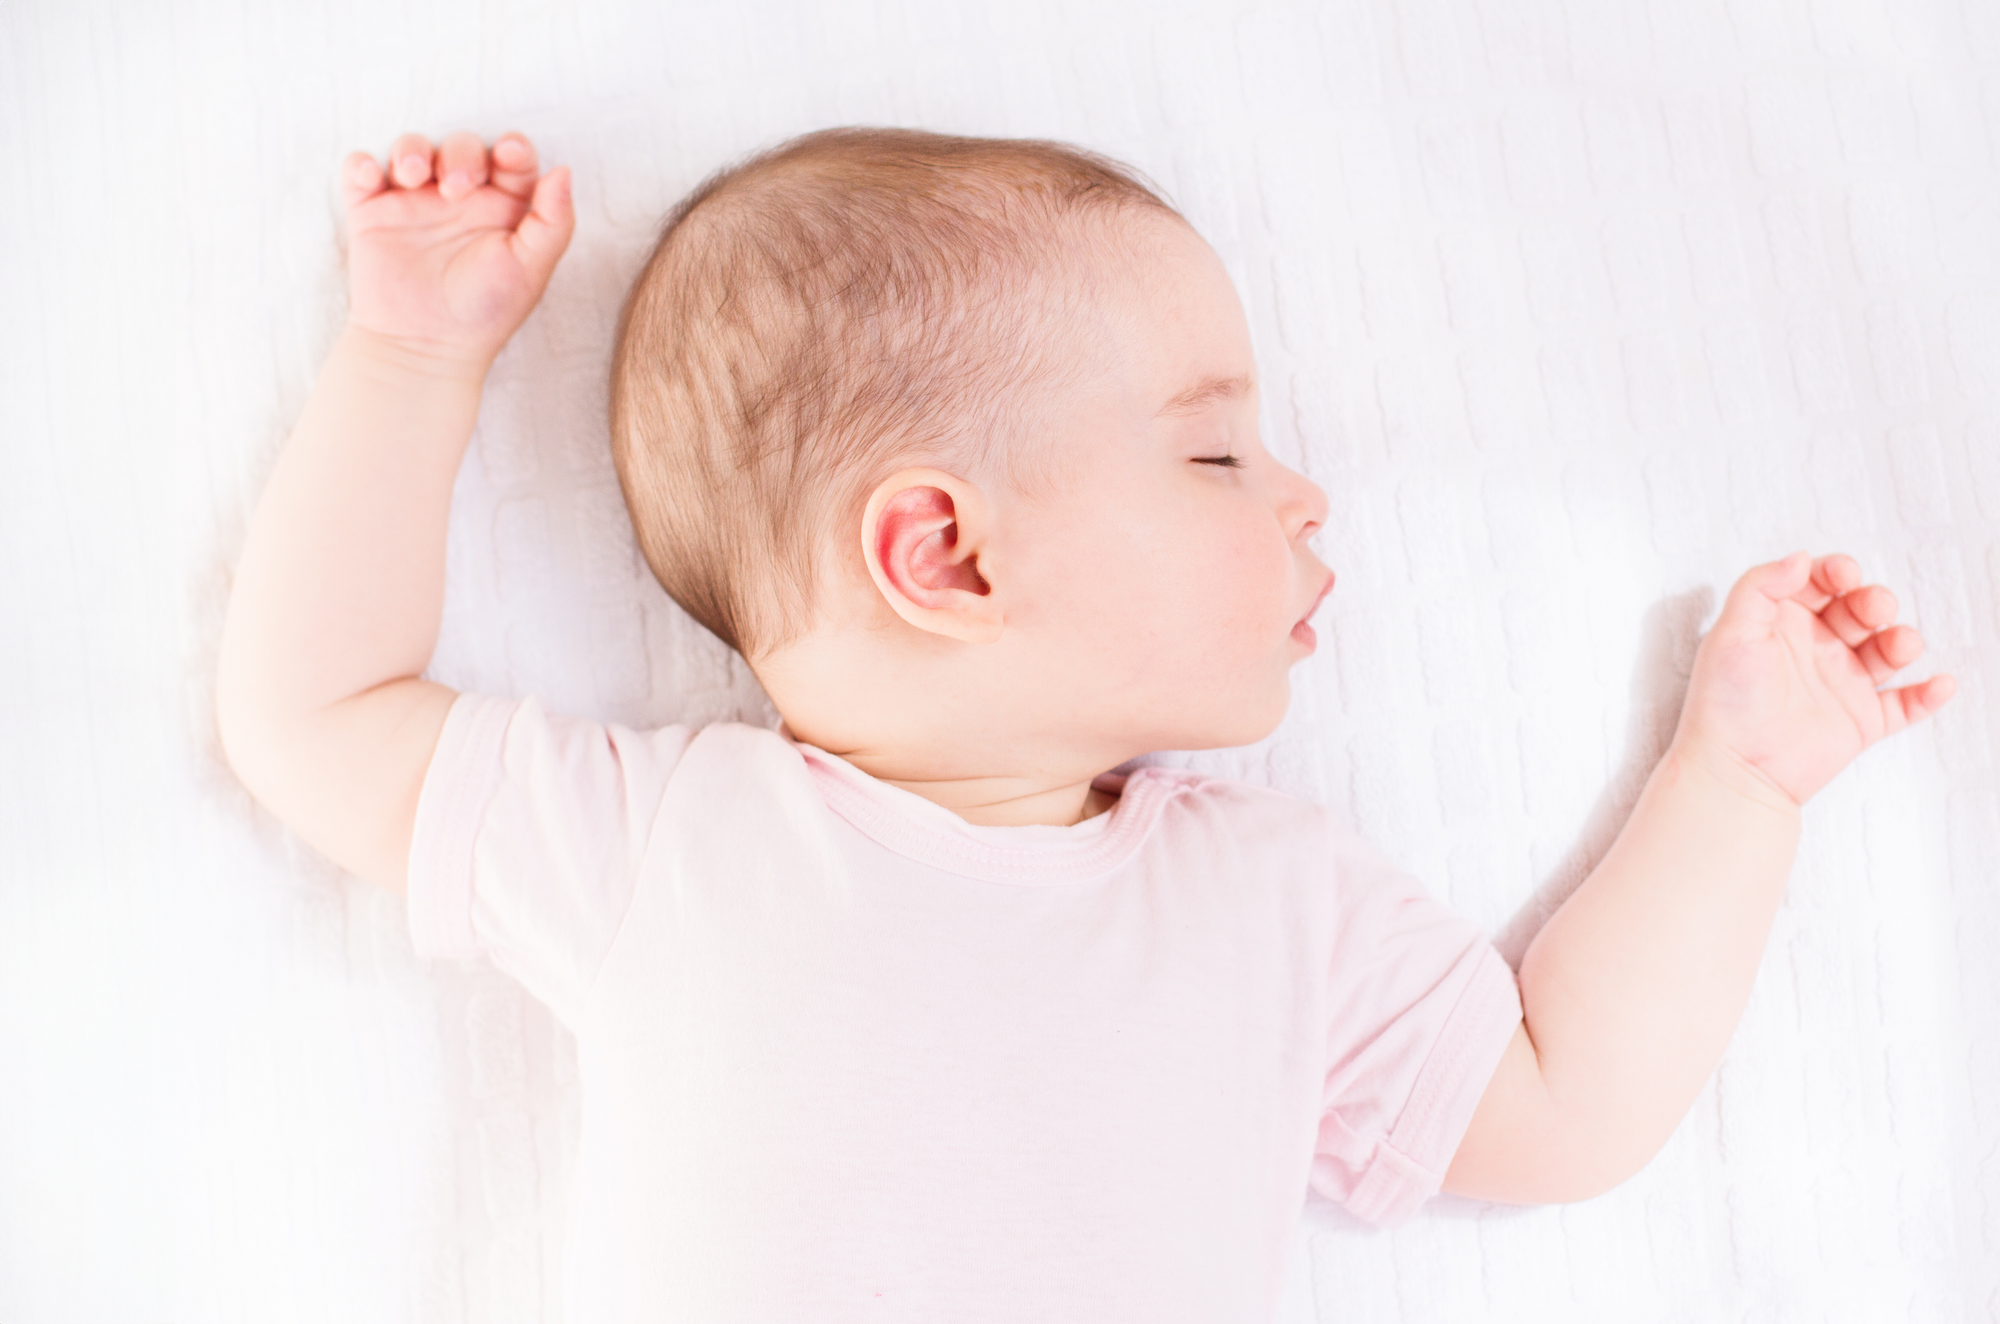 Balancing Structure and Flexibility with Pediatric Sleep Expert Dr. Judith Owens